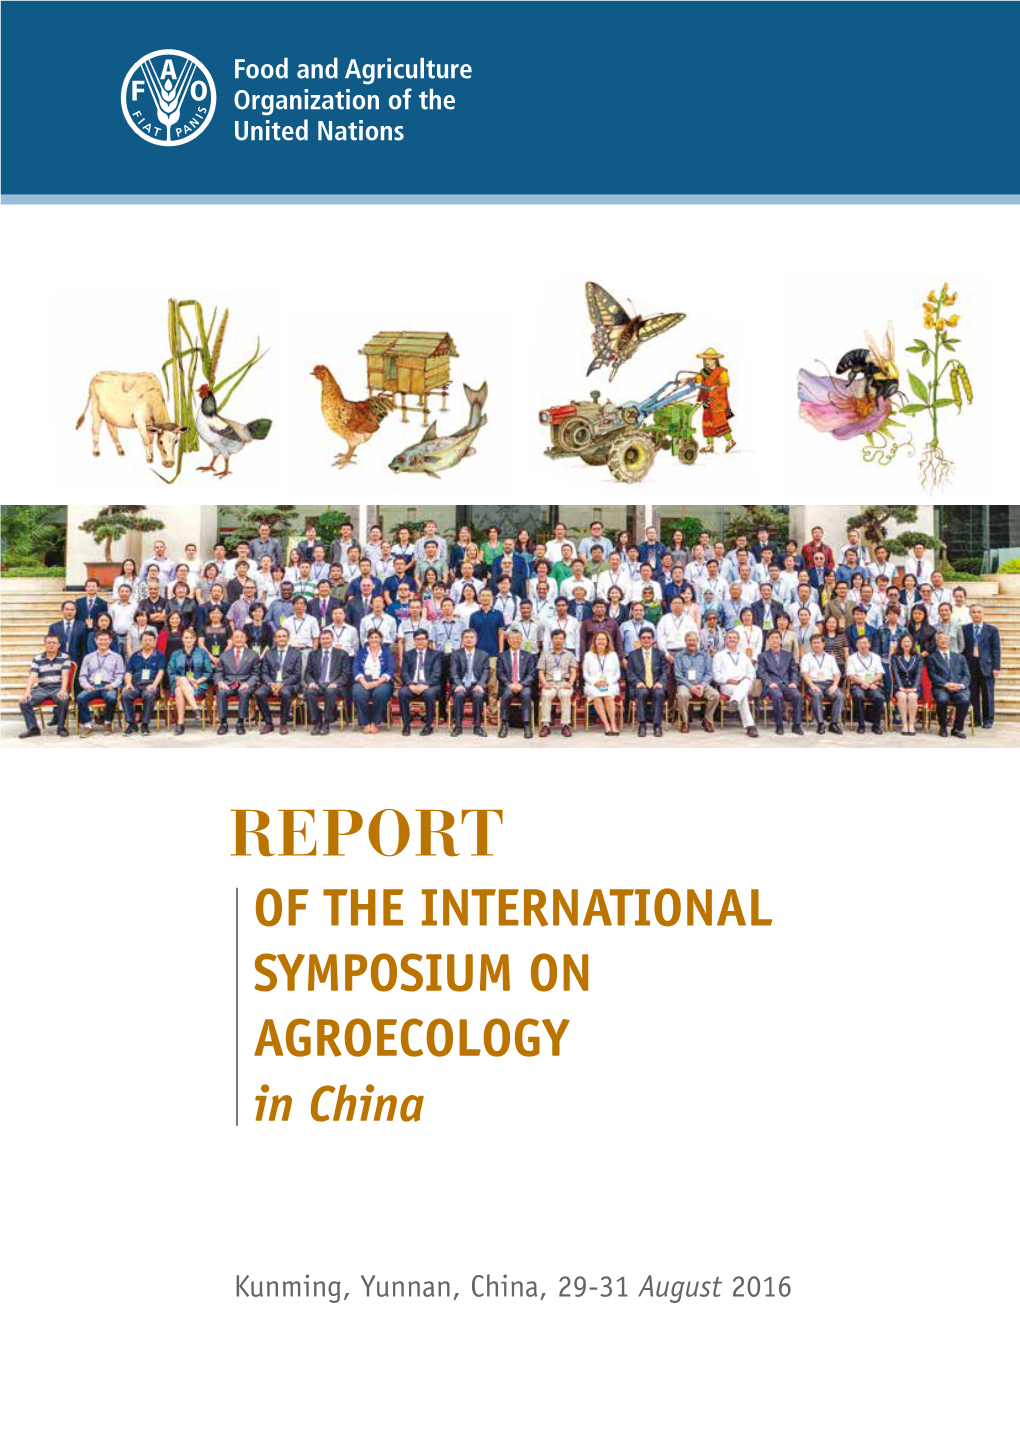 REPORT of the INTERNATIONAL SYMPOSIUM on AGROECOLOGY in China